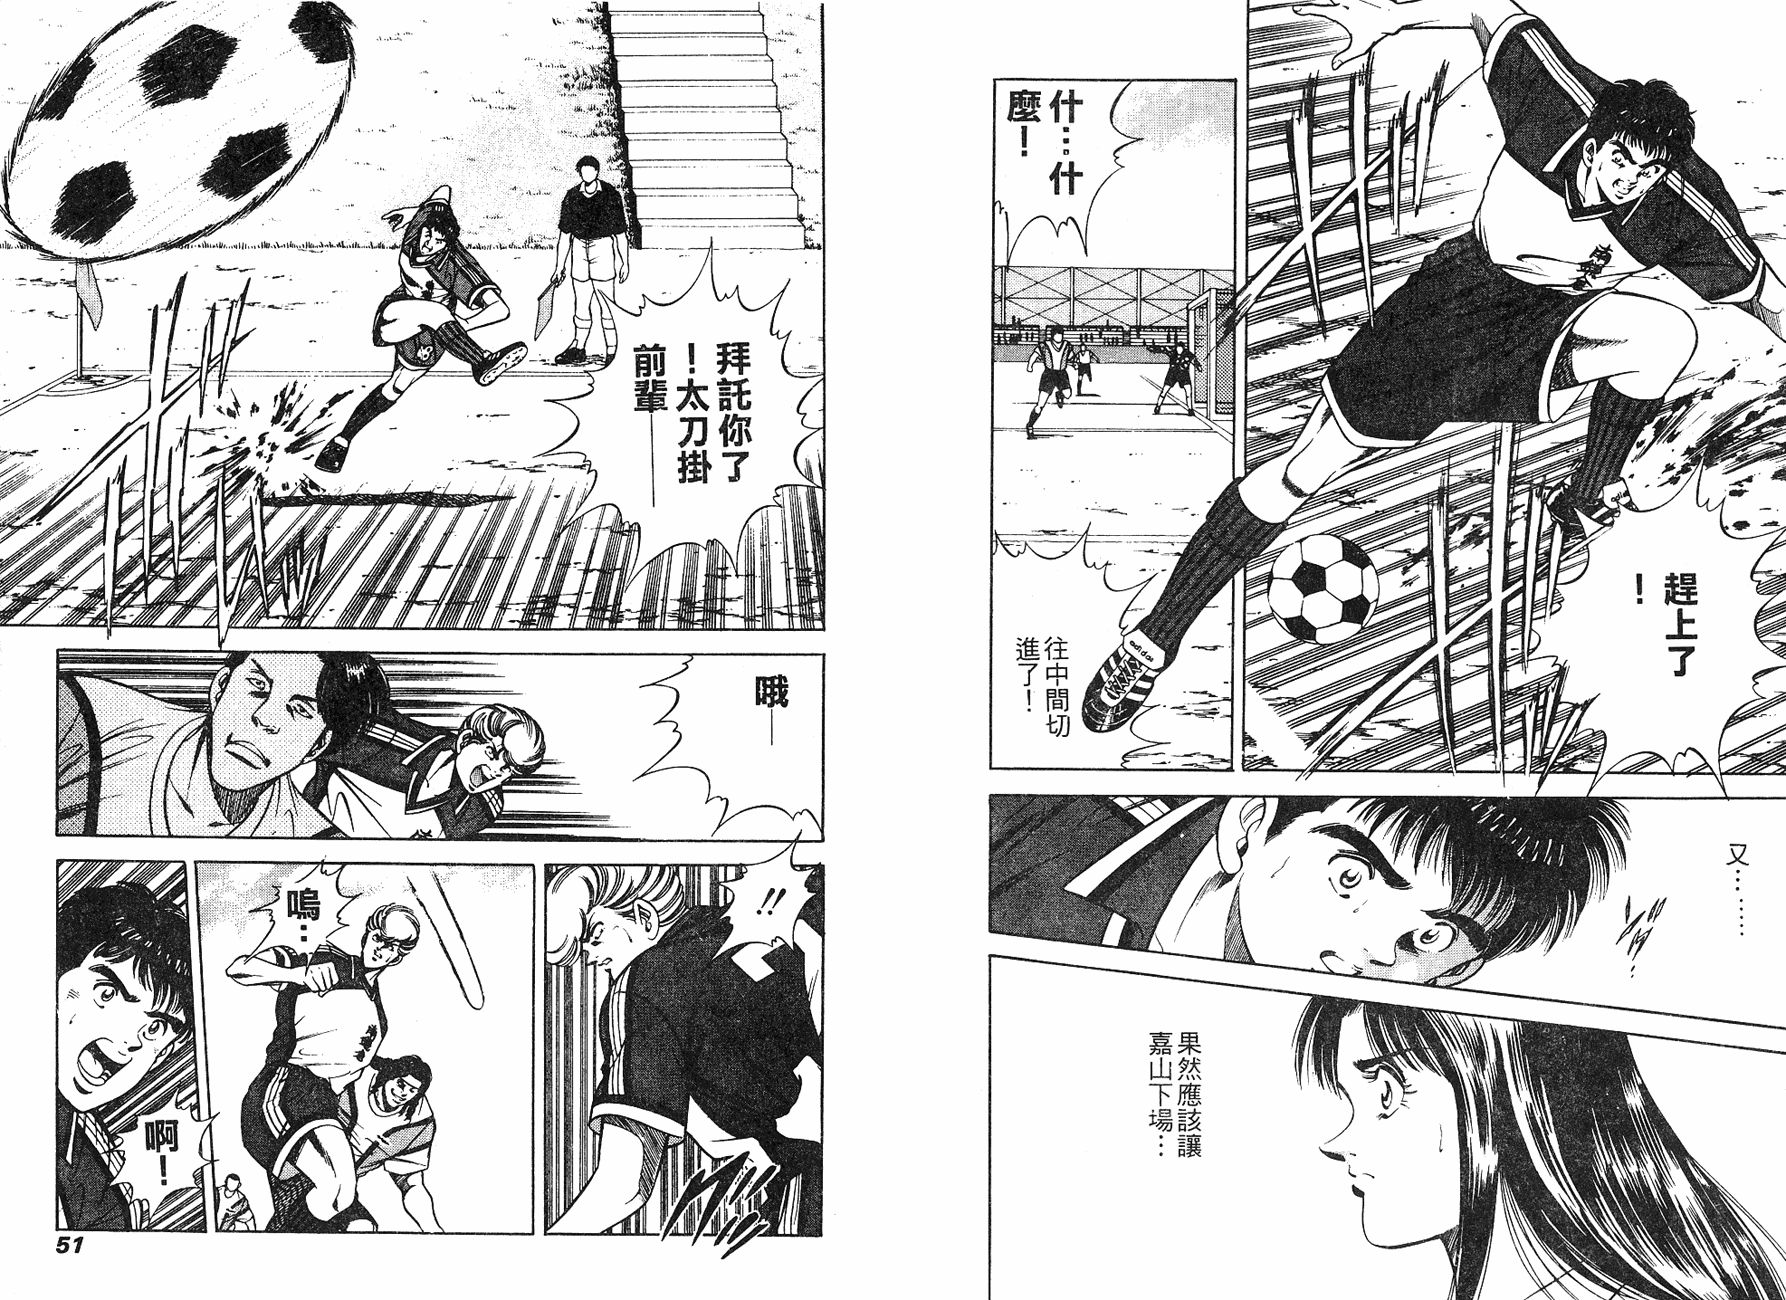 Two Top - 第04卷(1/2) - 3